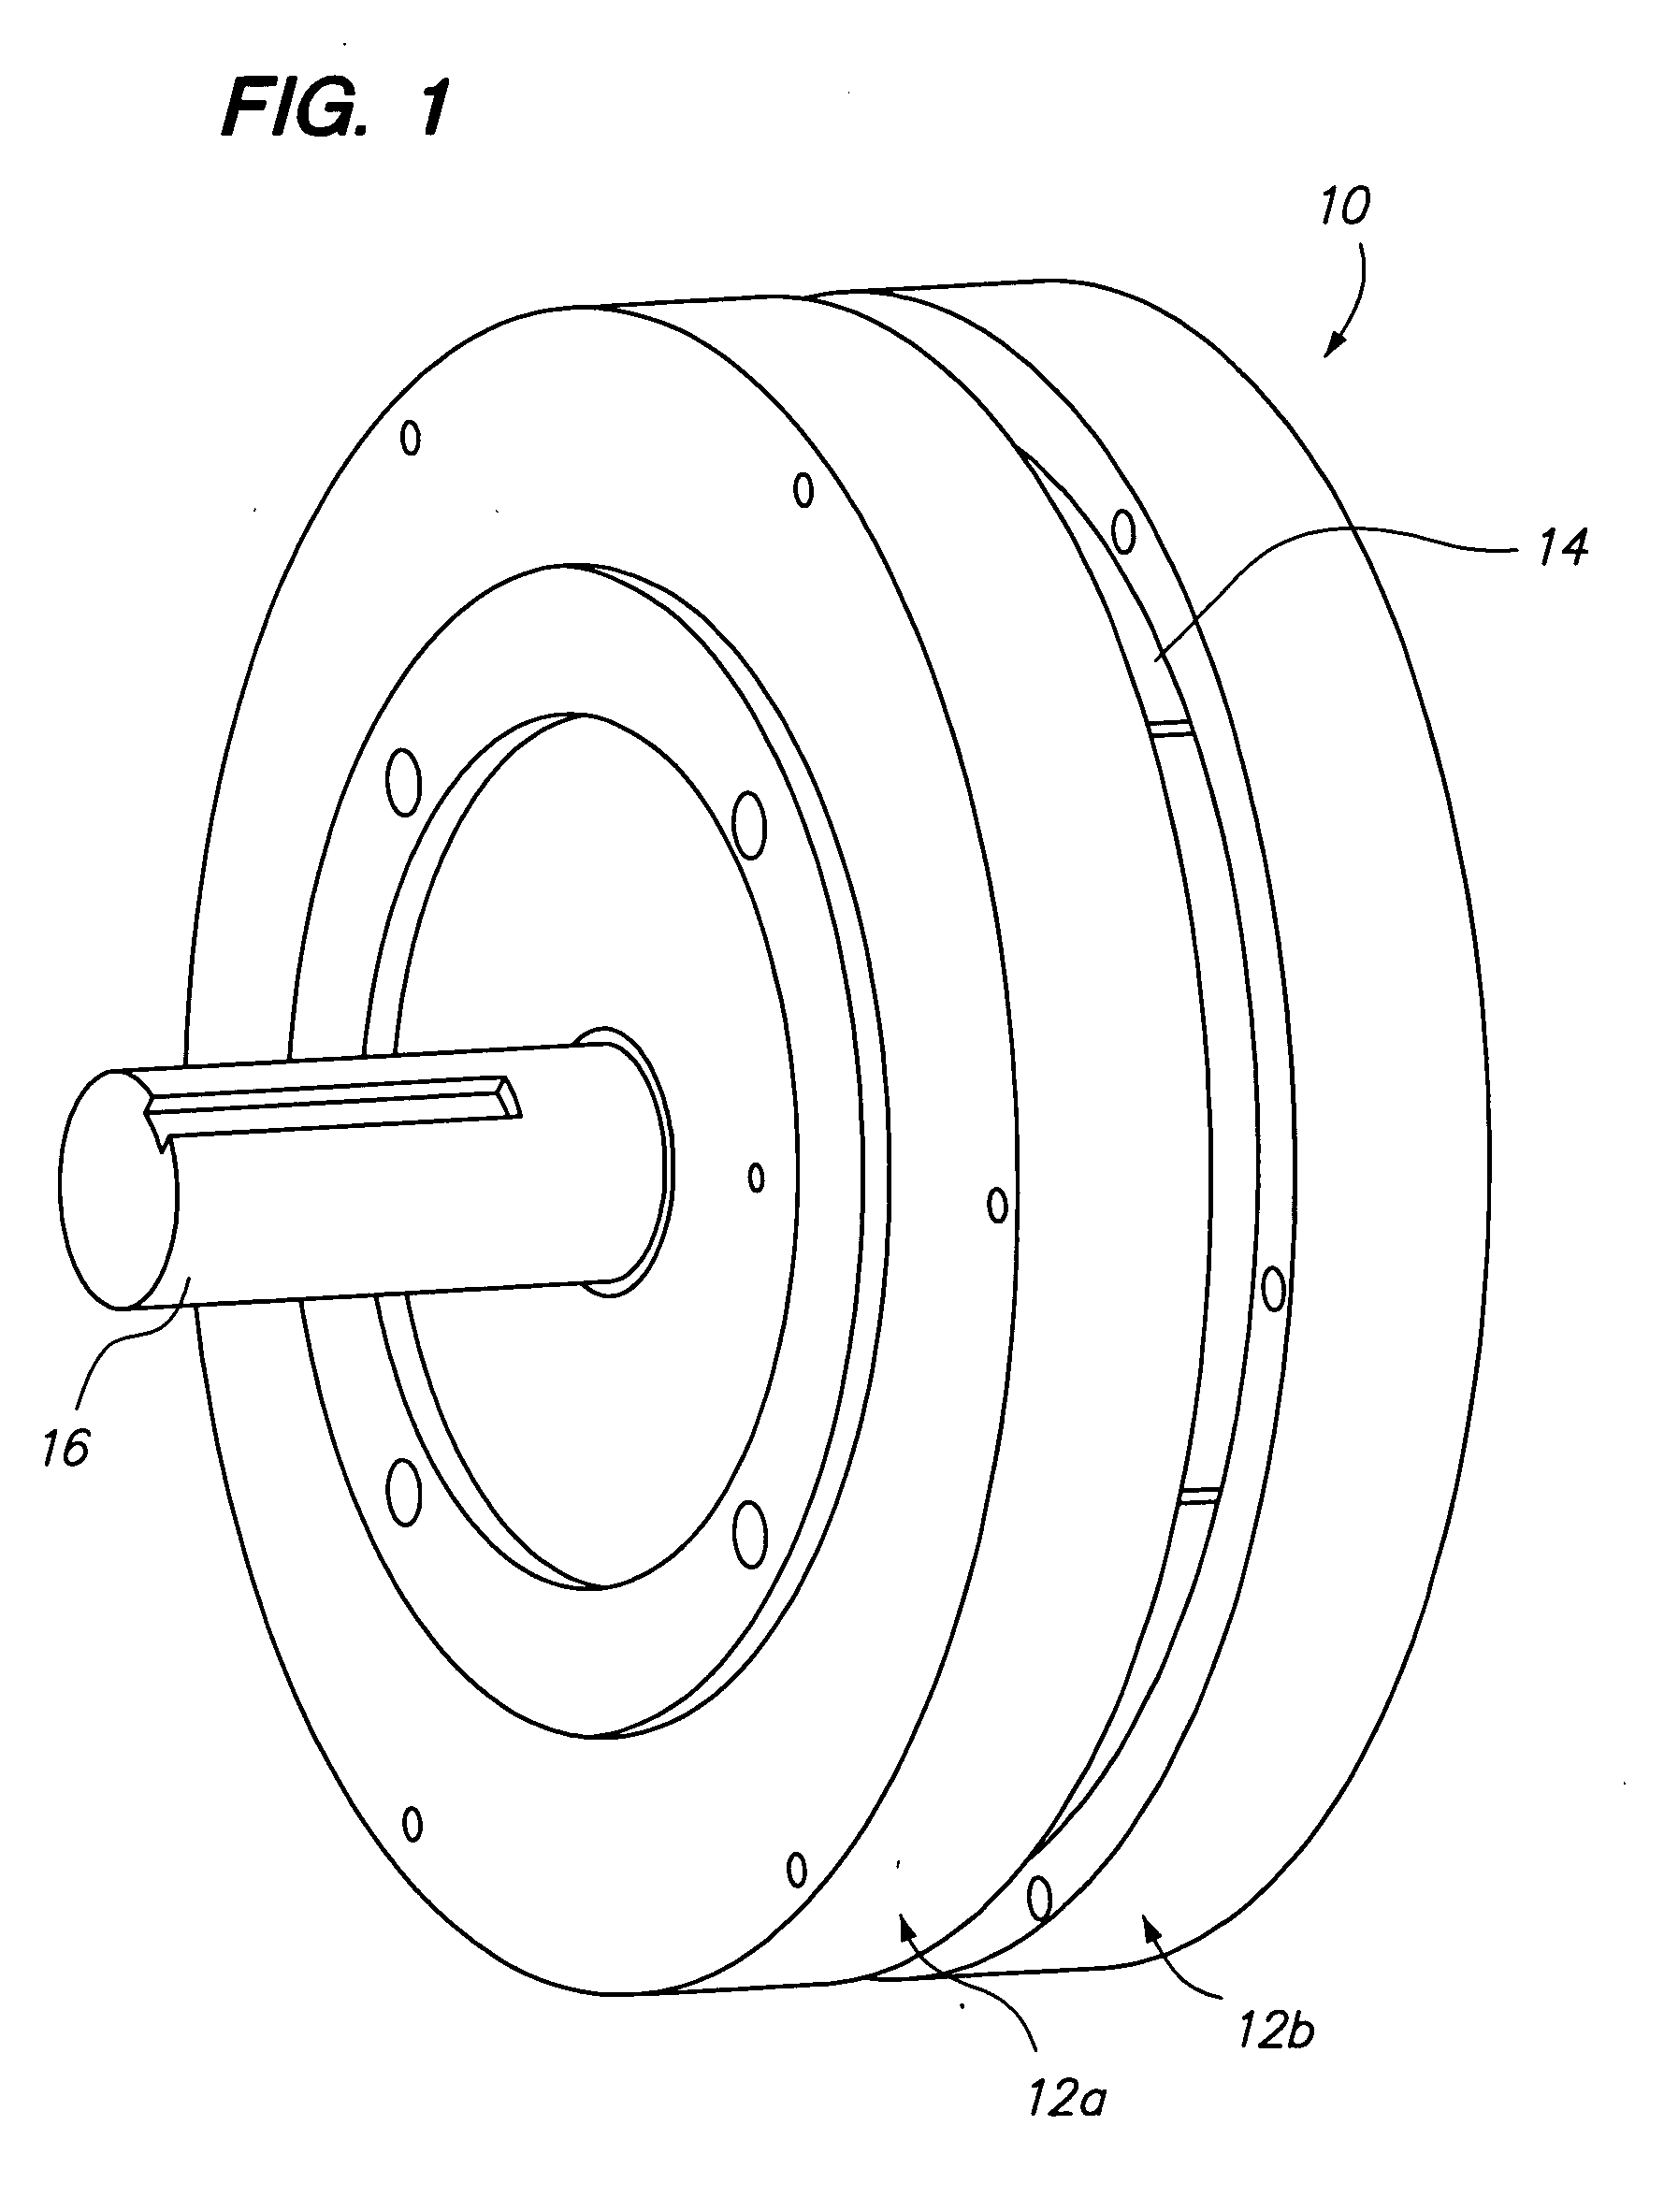 AC induction motor having multiple poles and increased stator/rotor gap